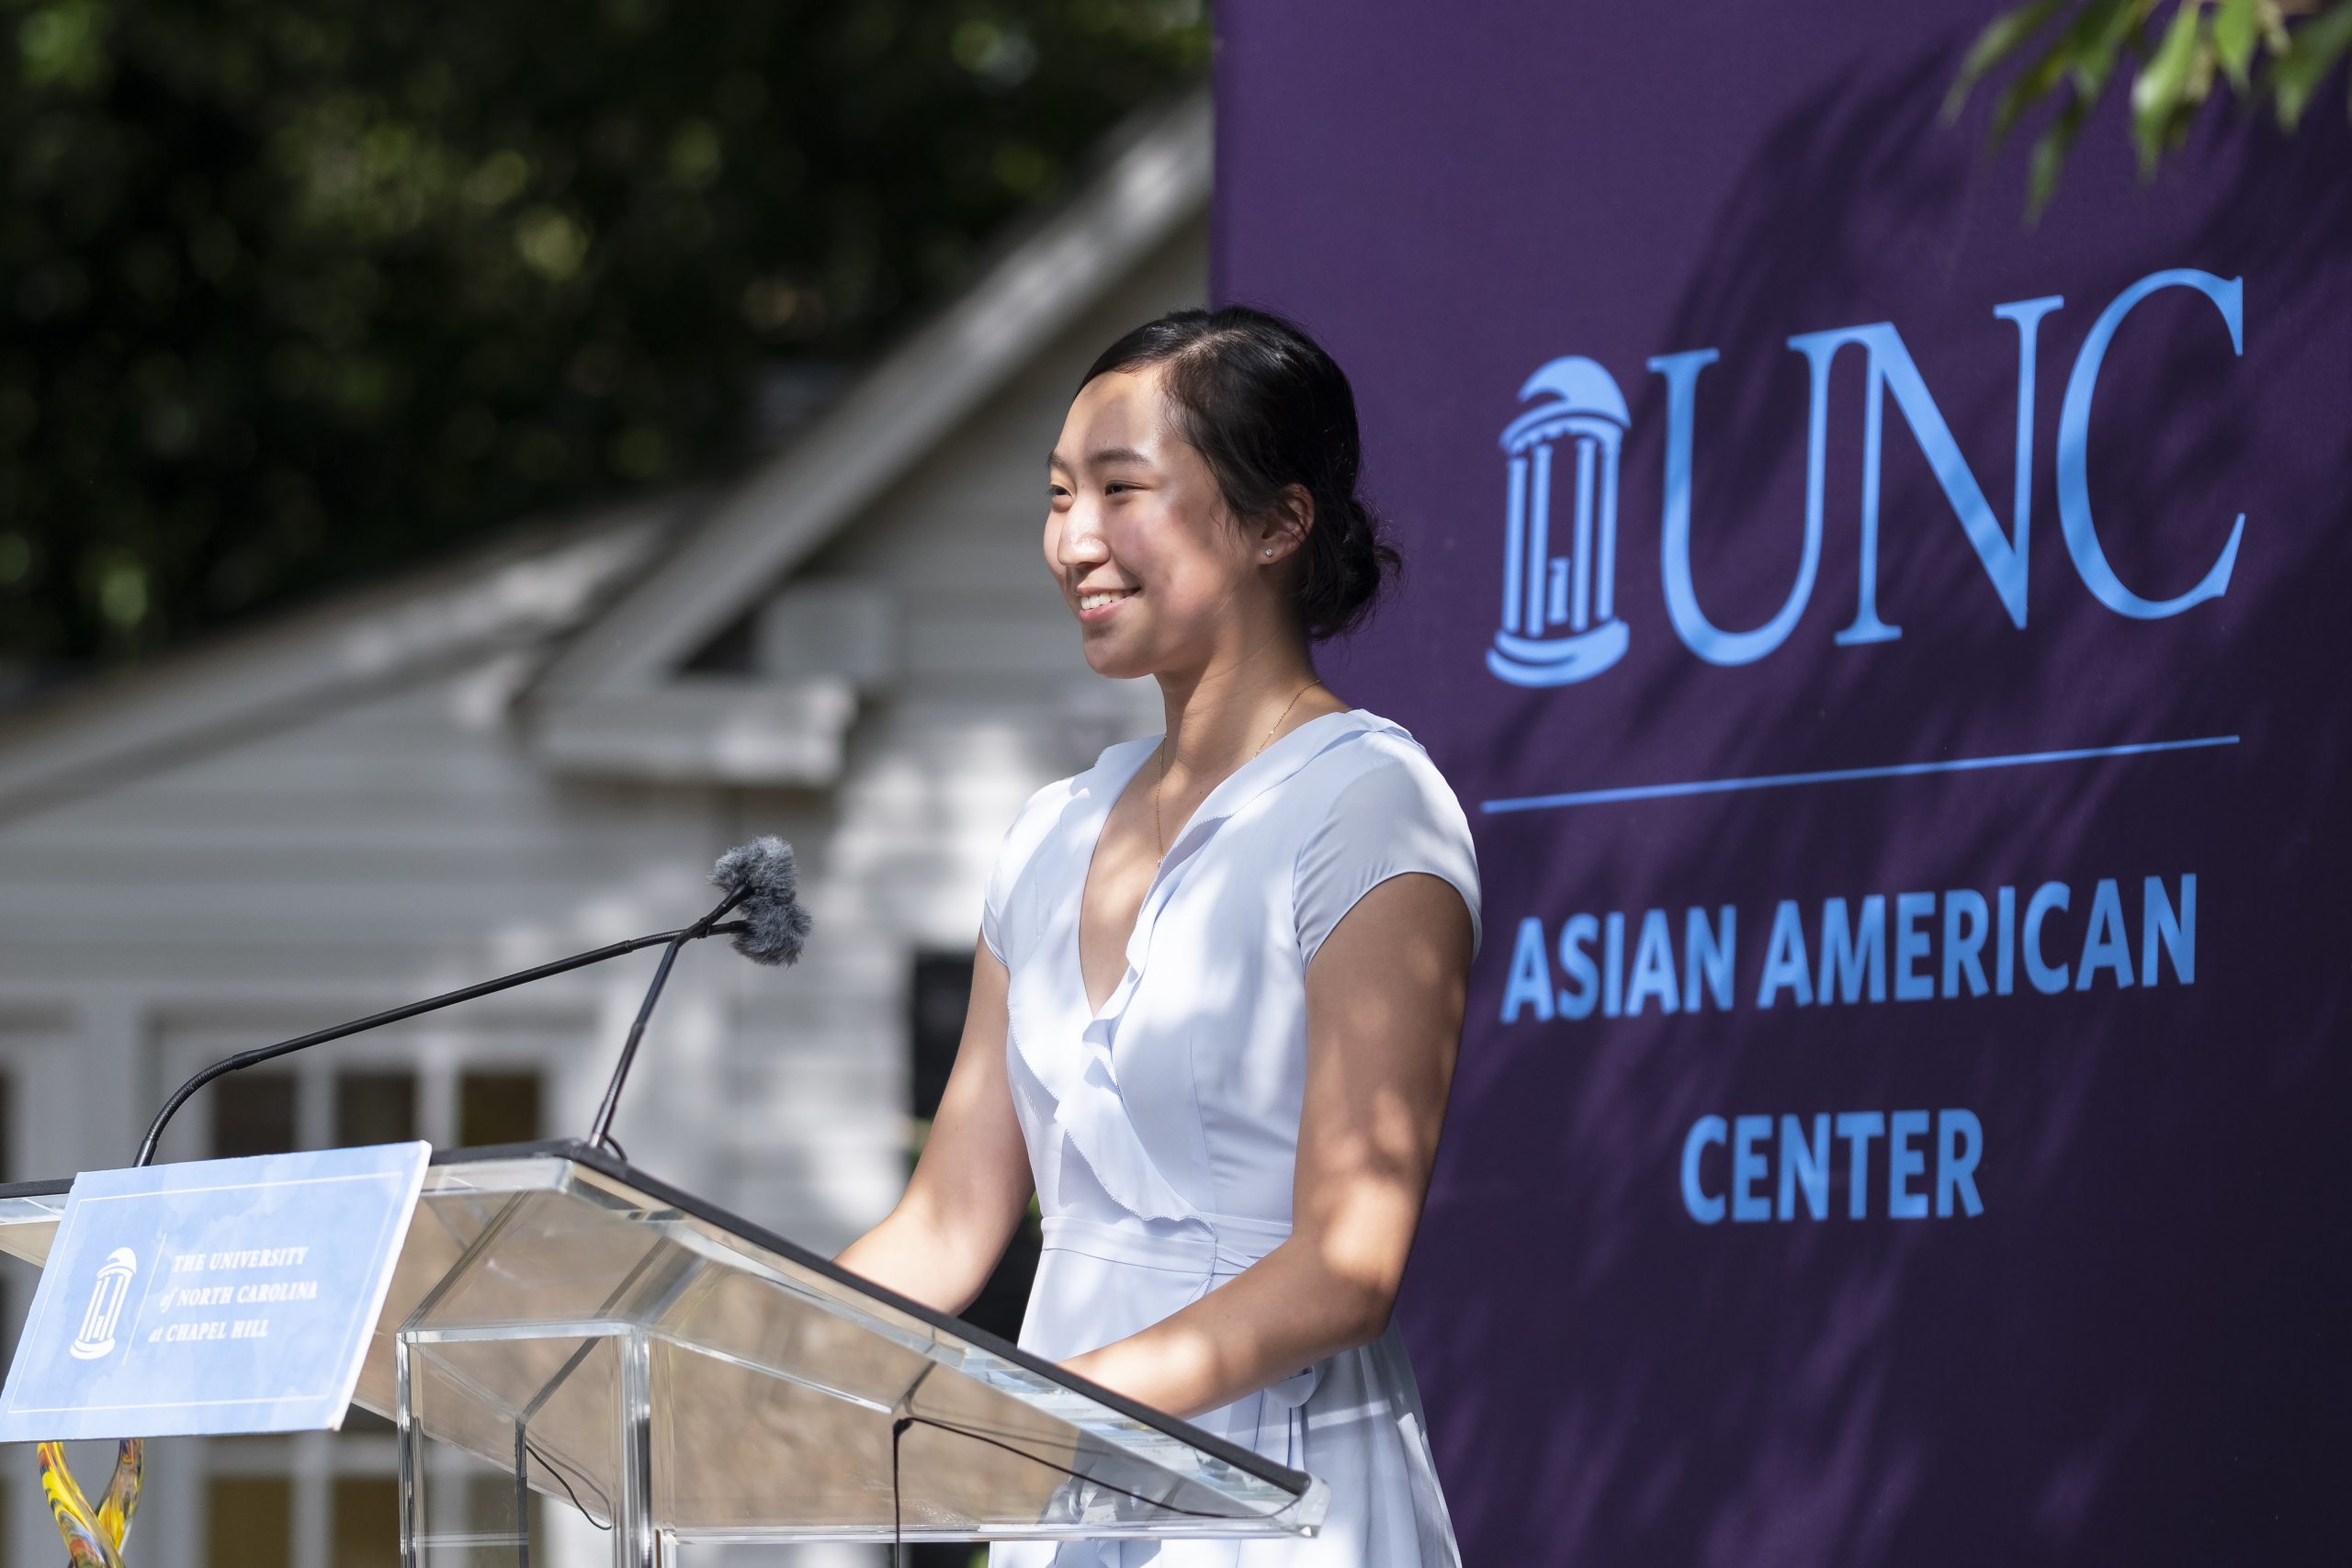 Asian American woman in white dress smiling standing at a lecturn.